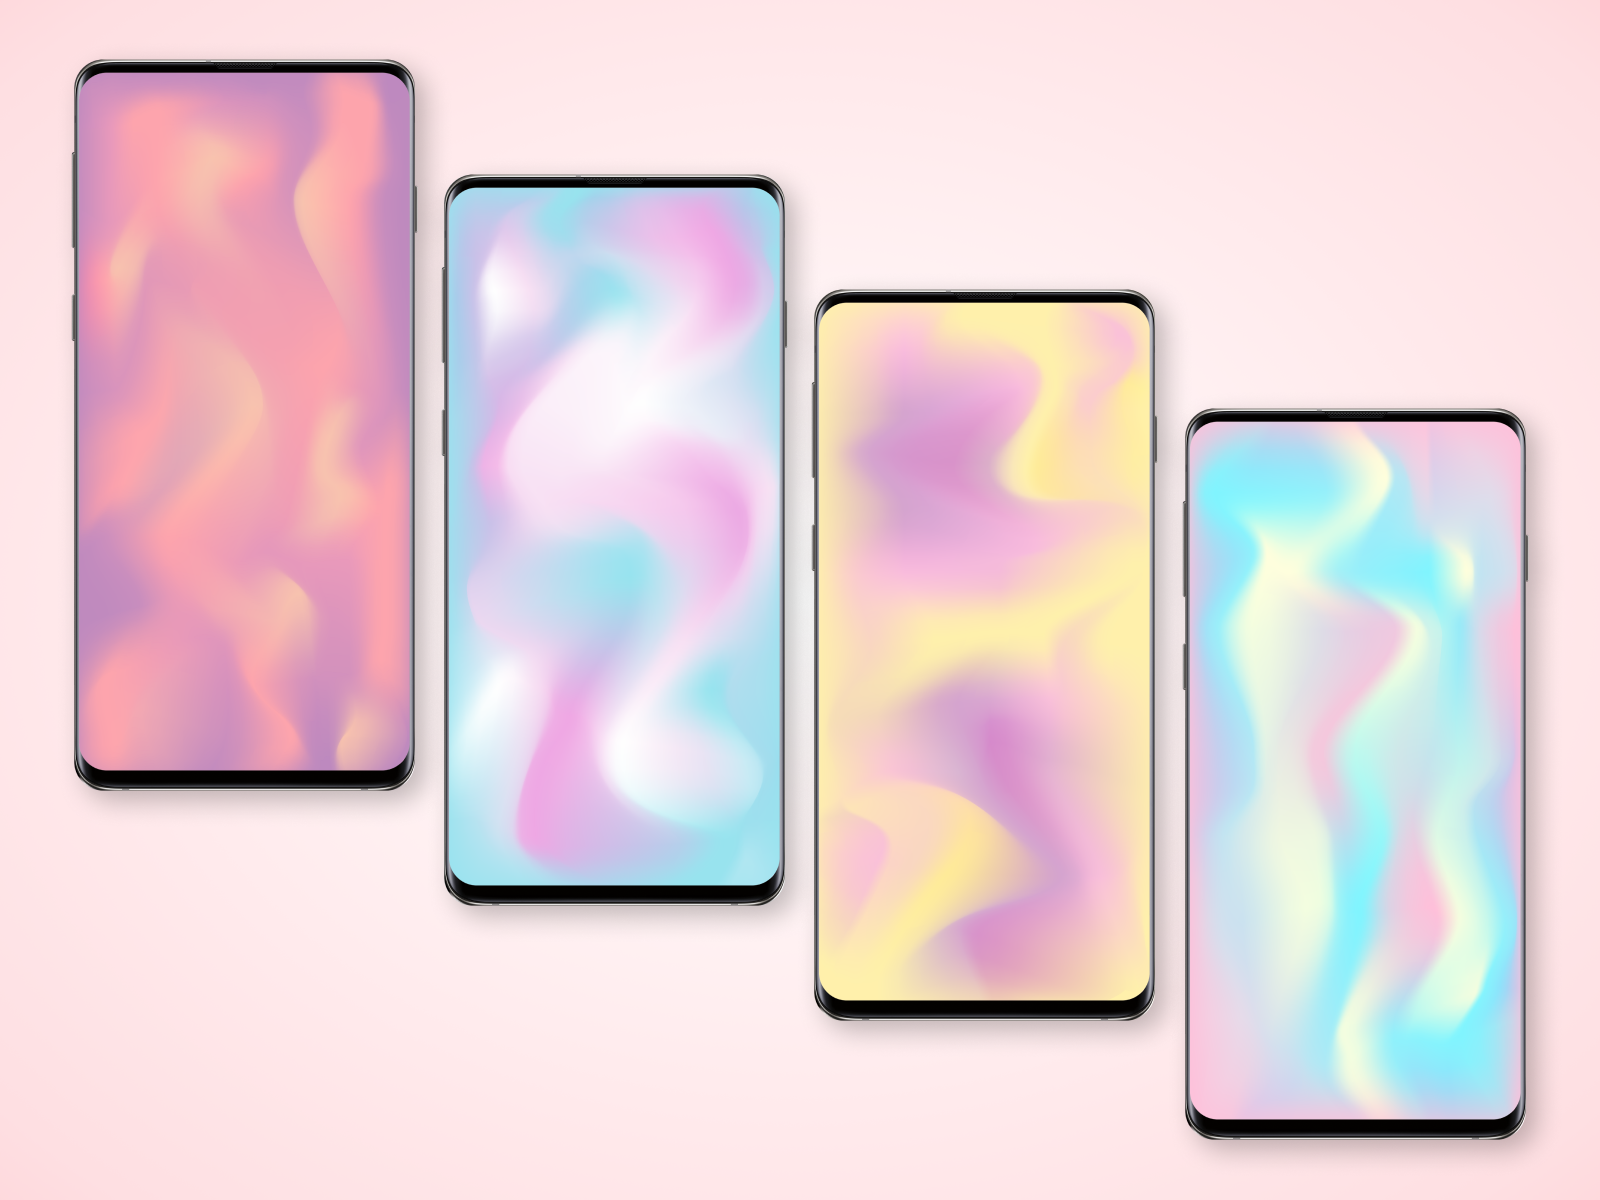 Samsung Galaxy S10 vs S9 vs S8 compared to decide if you should upgrade   The Verge